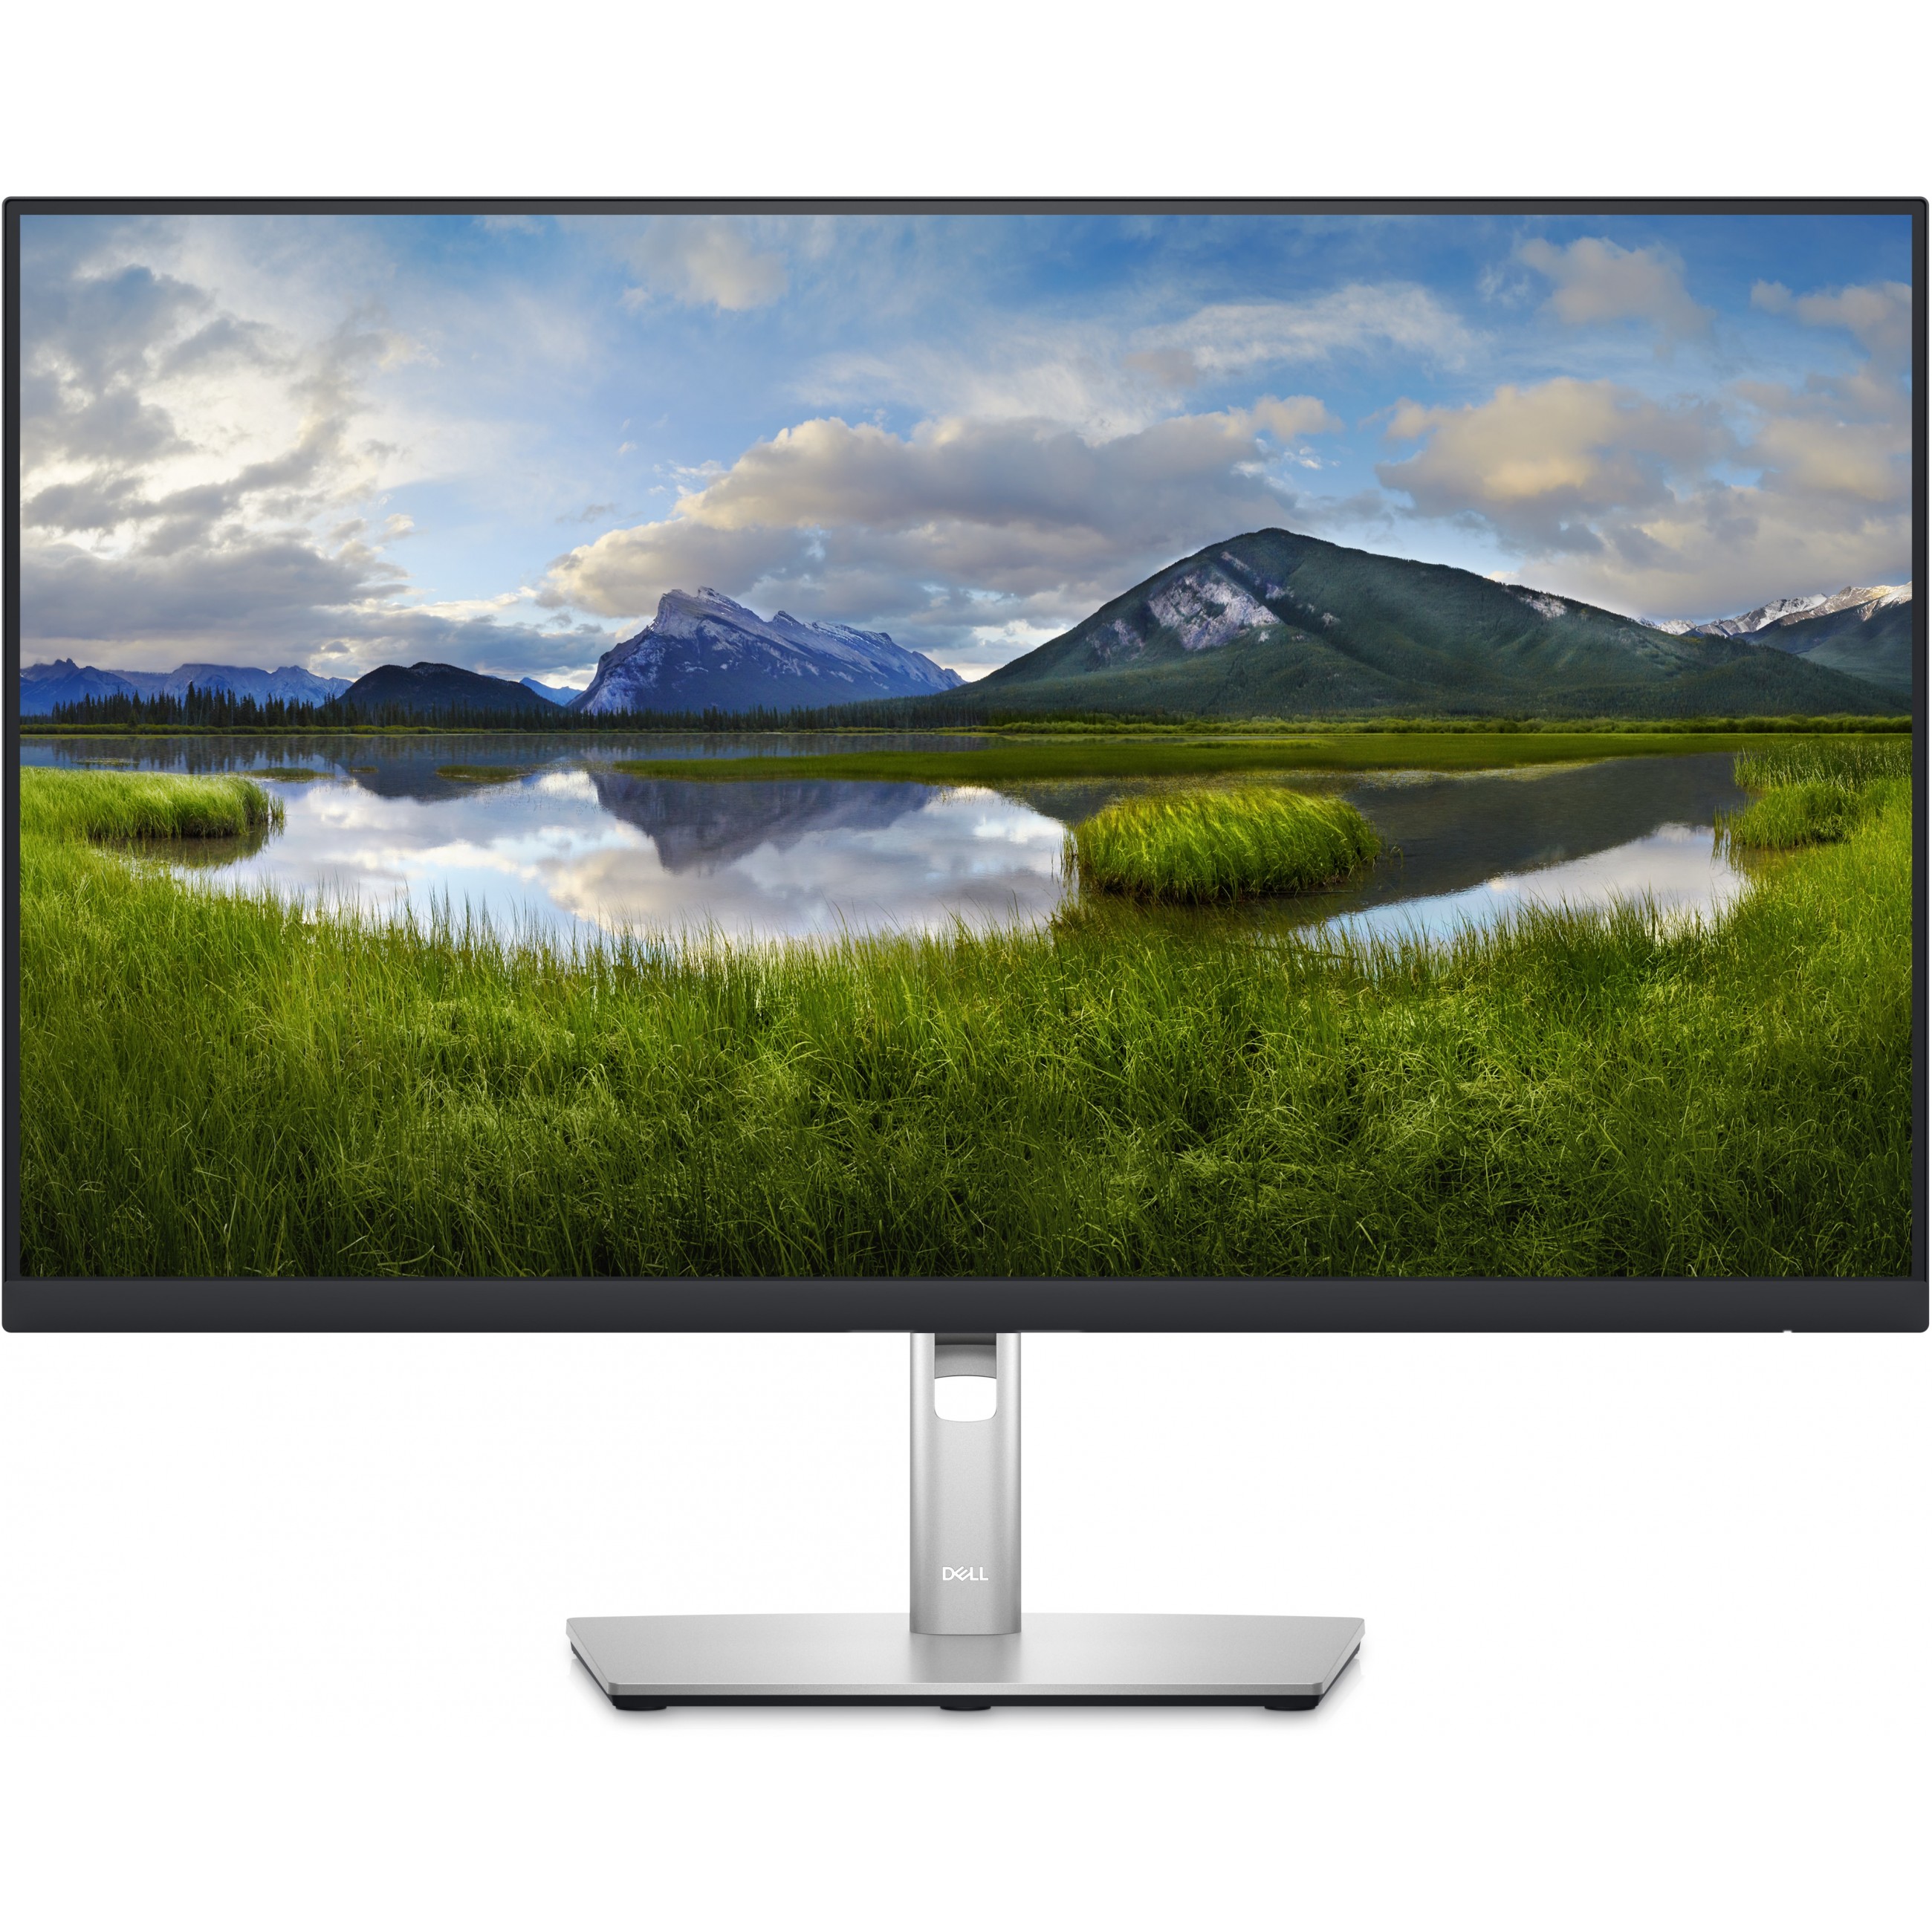 DELL P Series P2723D LED display